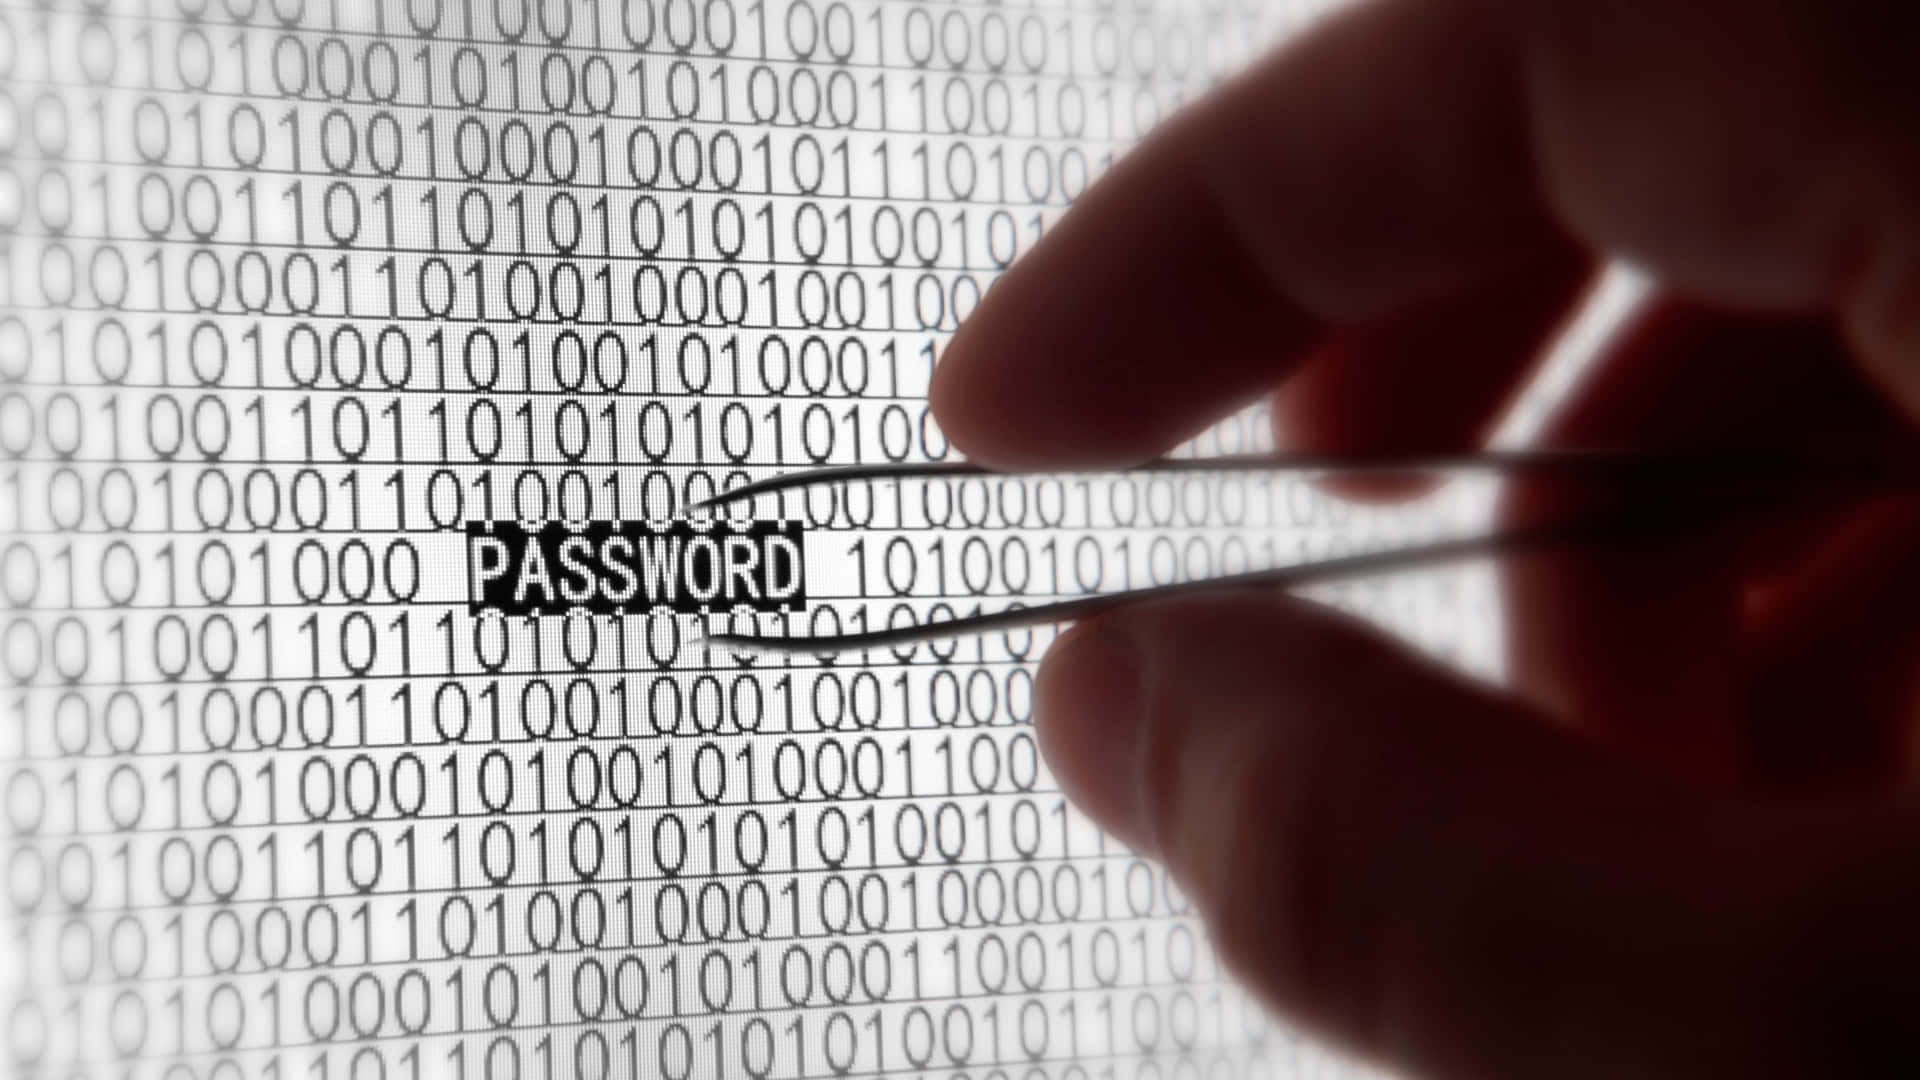 A Person Is Holding A Pair Of Scissors And Typing Password